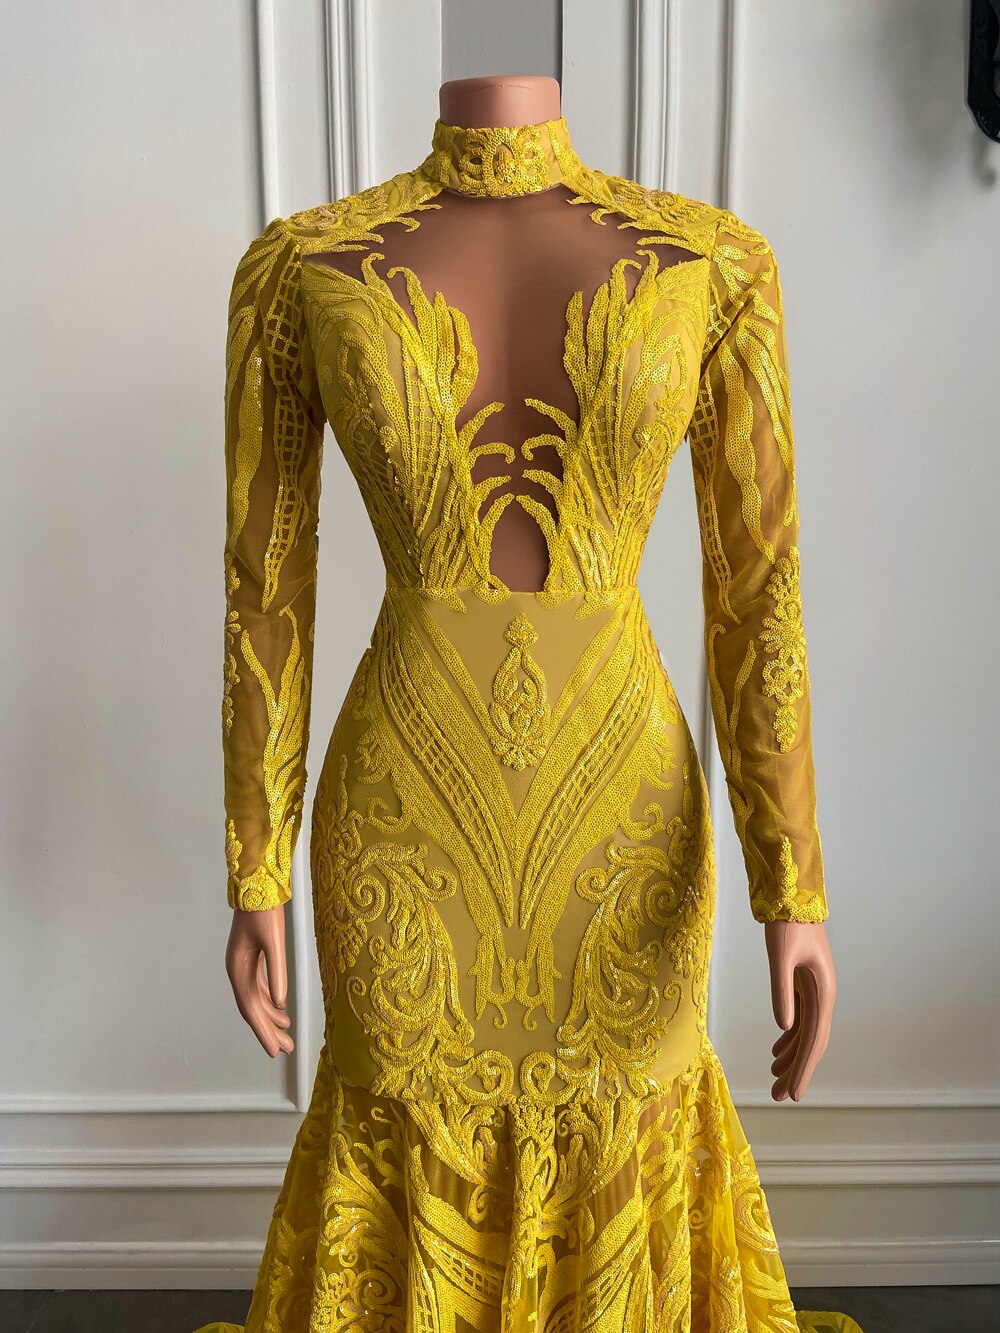 Mermaid Style Long Sleeve High Neck Yellow Sequin Long Prom Dresses